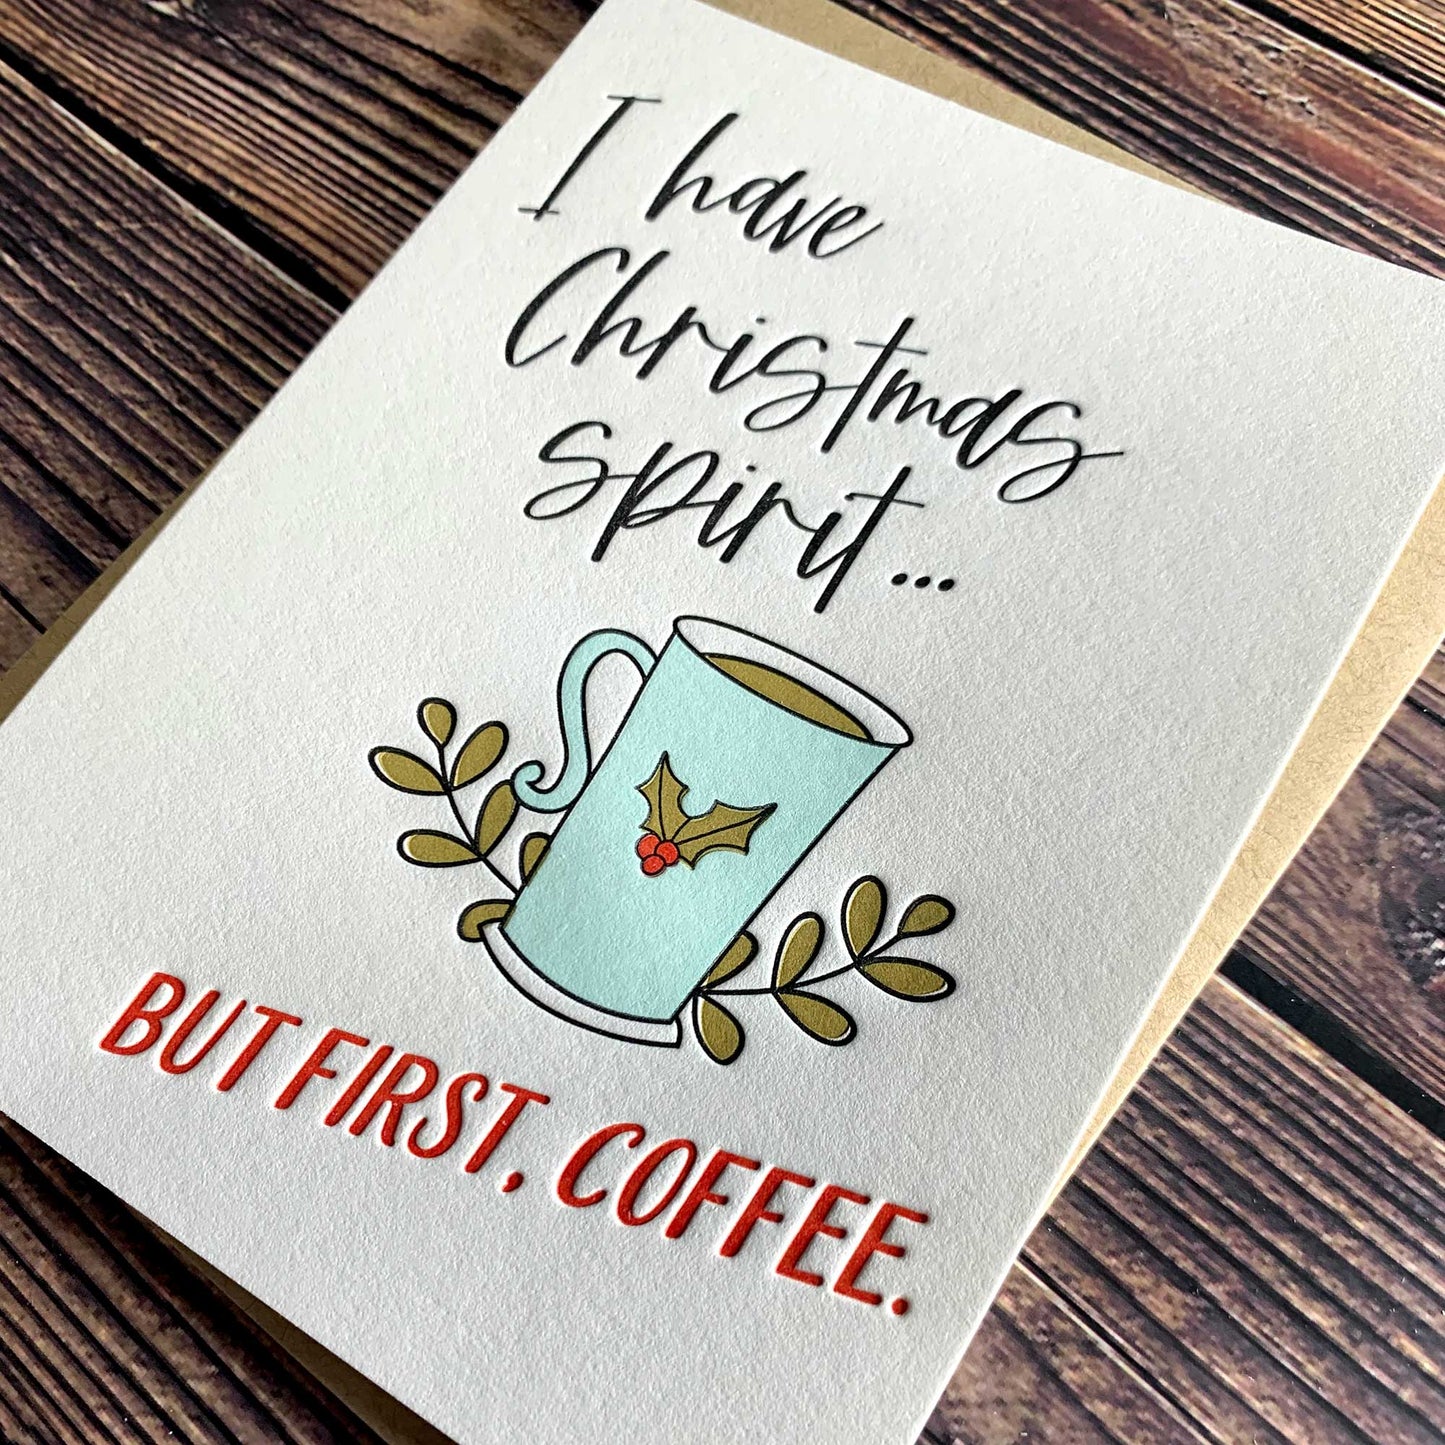 But First Coffee. Christmas Gifts for Coffee Lovers.